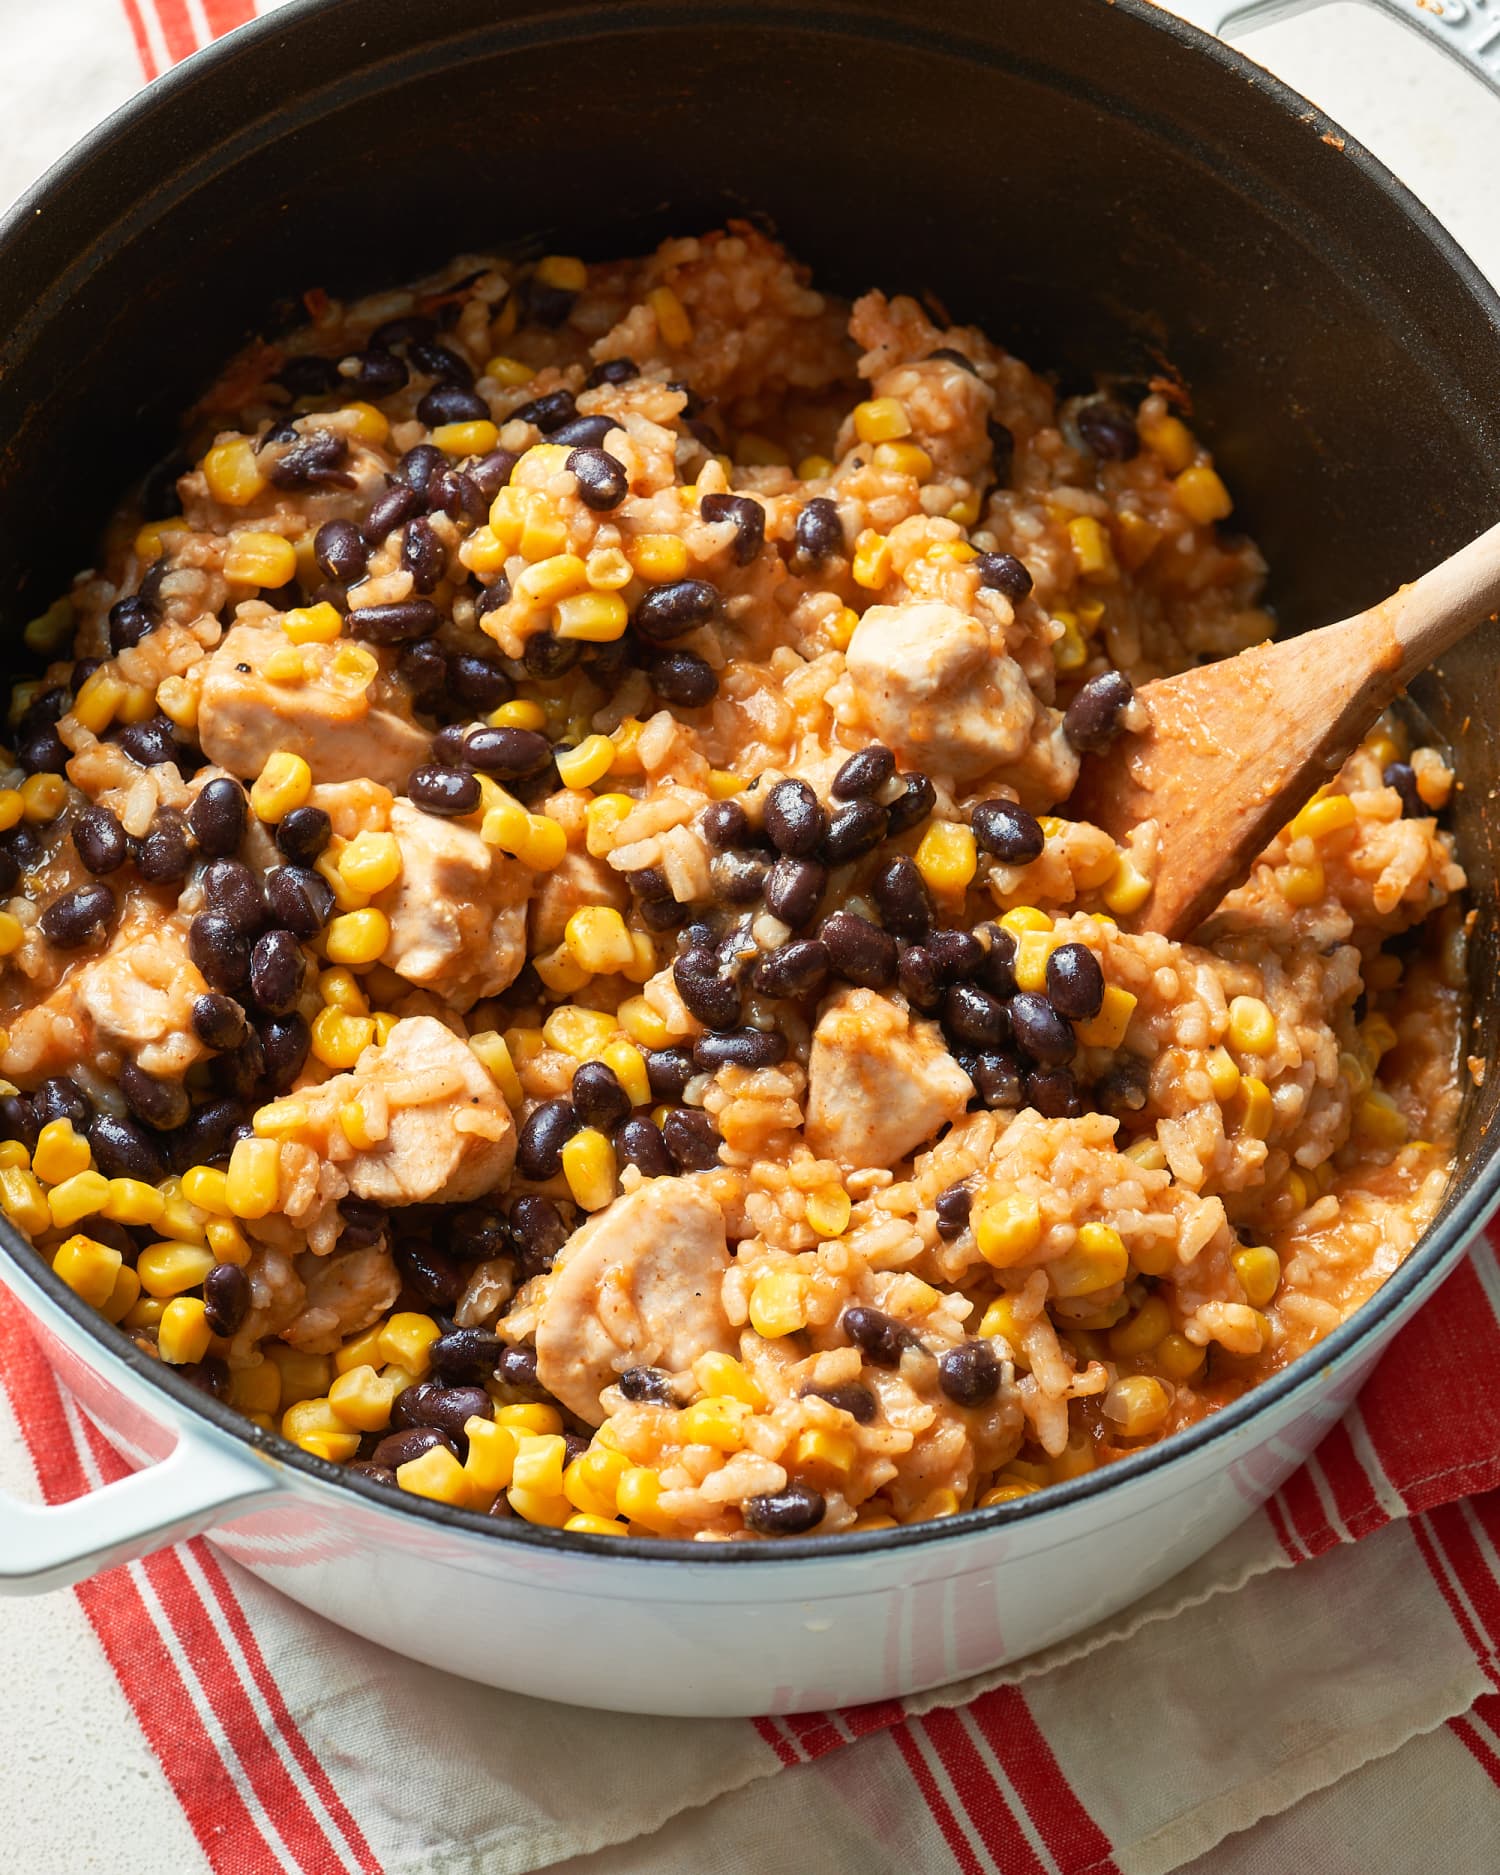 50+ One-Pot Meals for Easy Weeknight Dinners